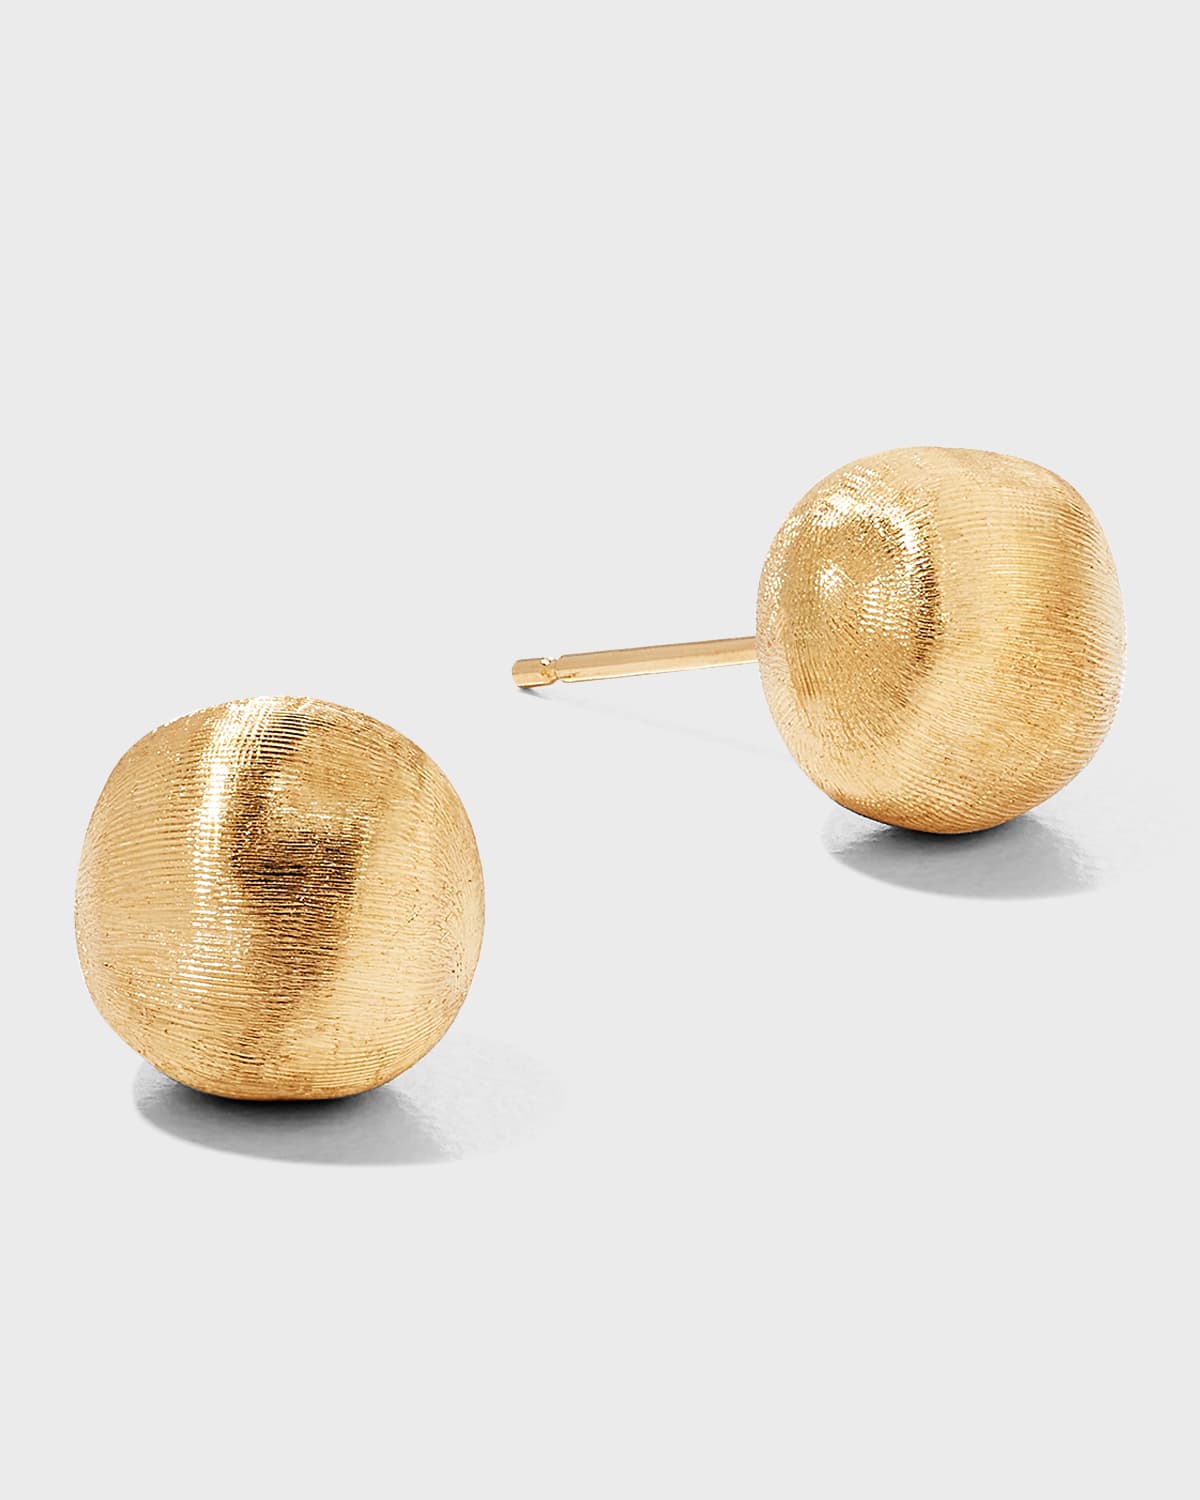 petite metalsmith earrings gold filled jewelry,tiny gold artisan drops Tiny gold filled shiny disc dangle earrings small gold earrings